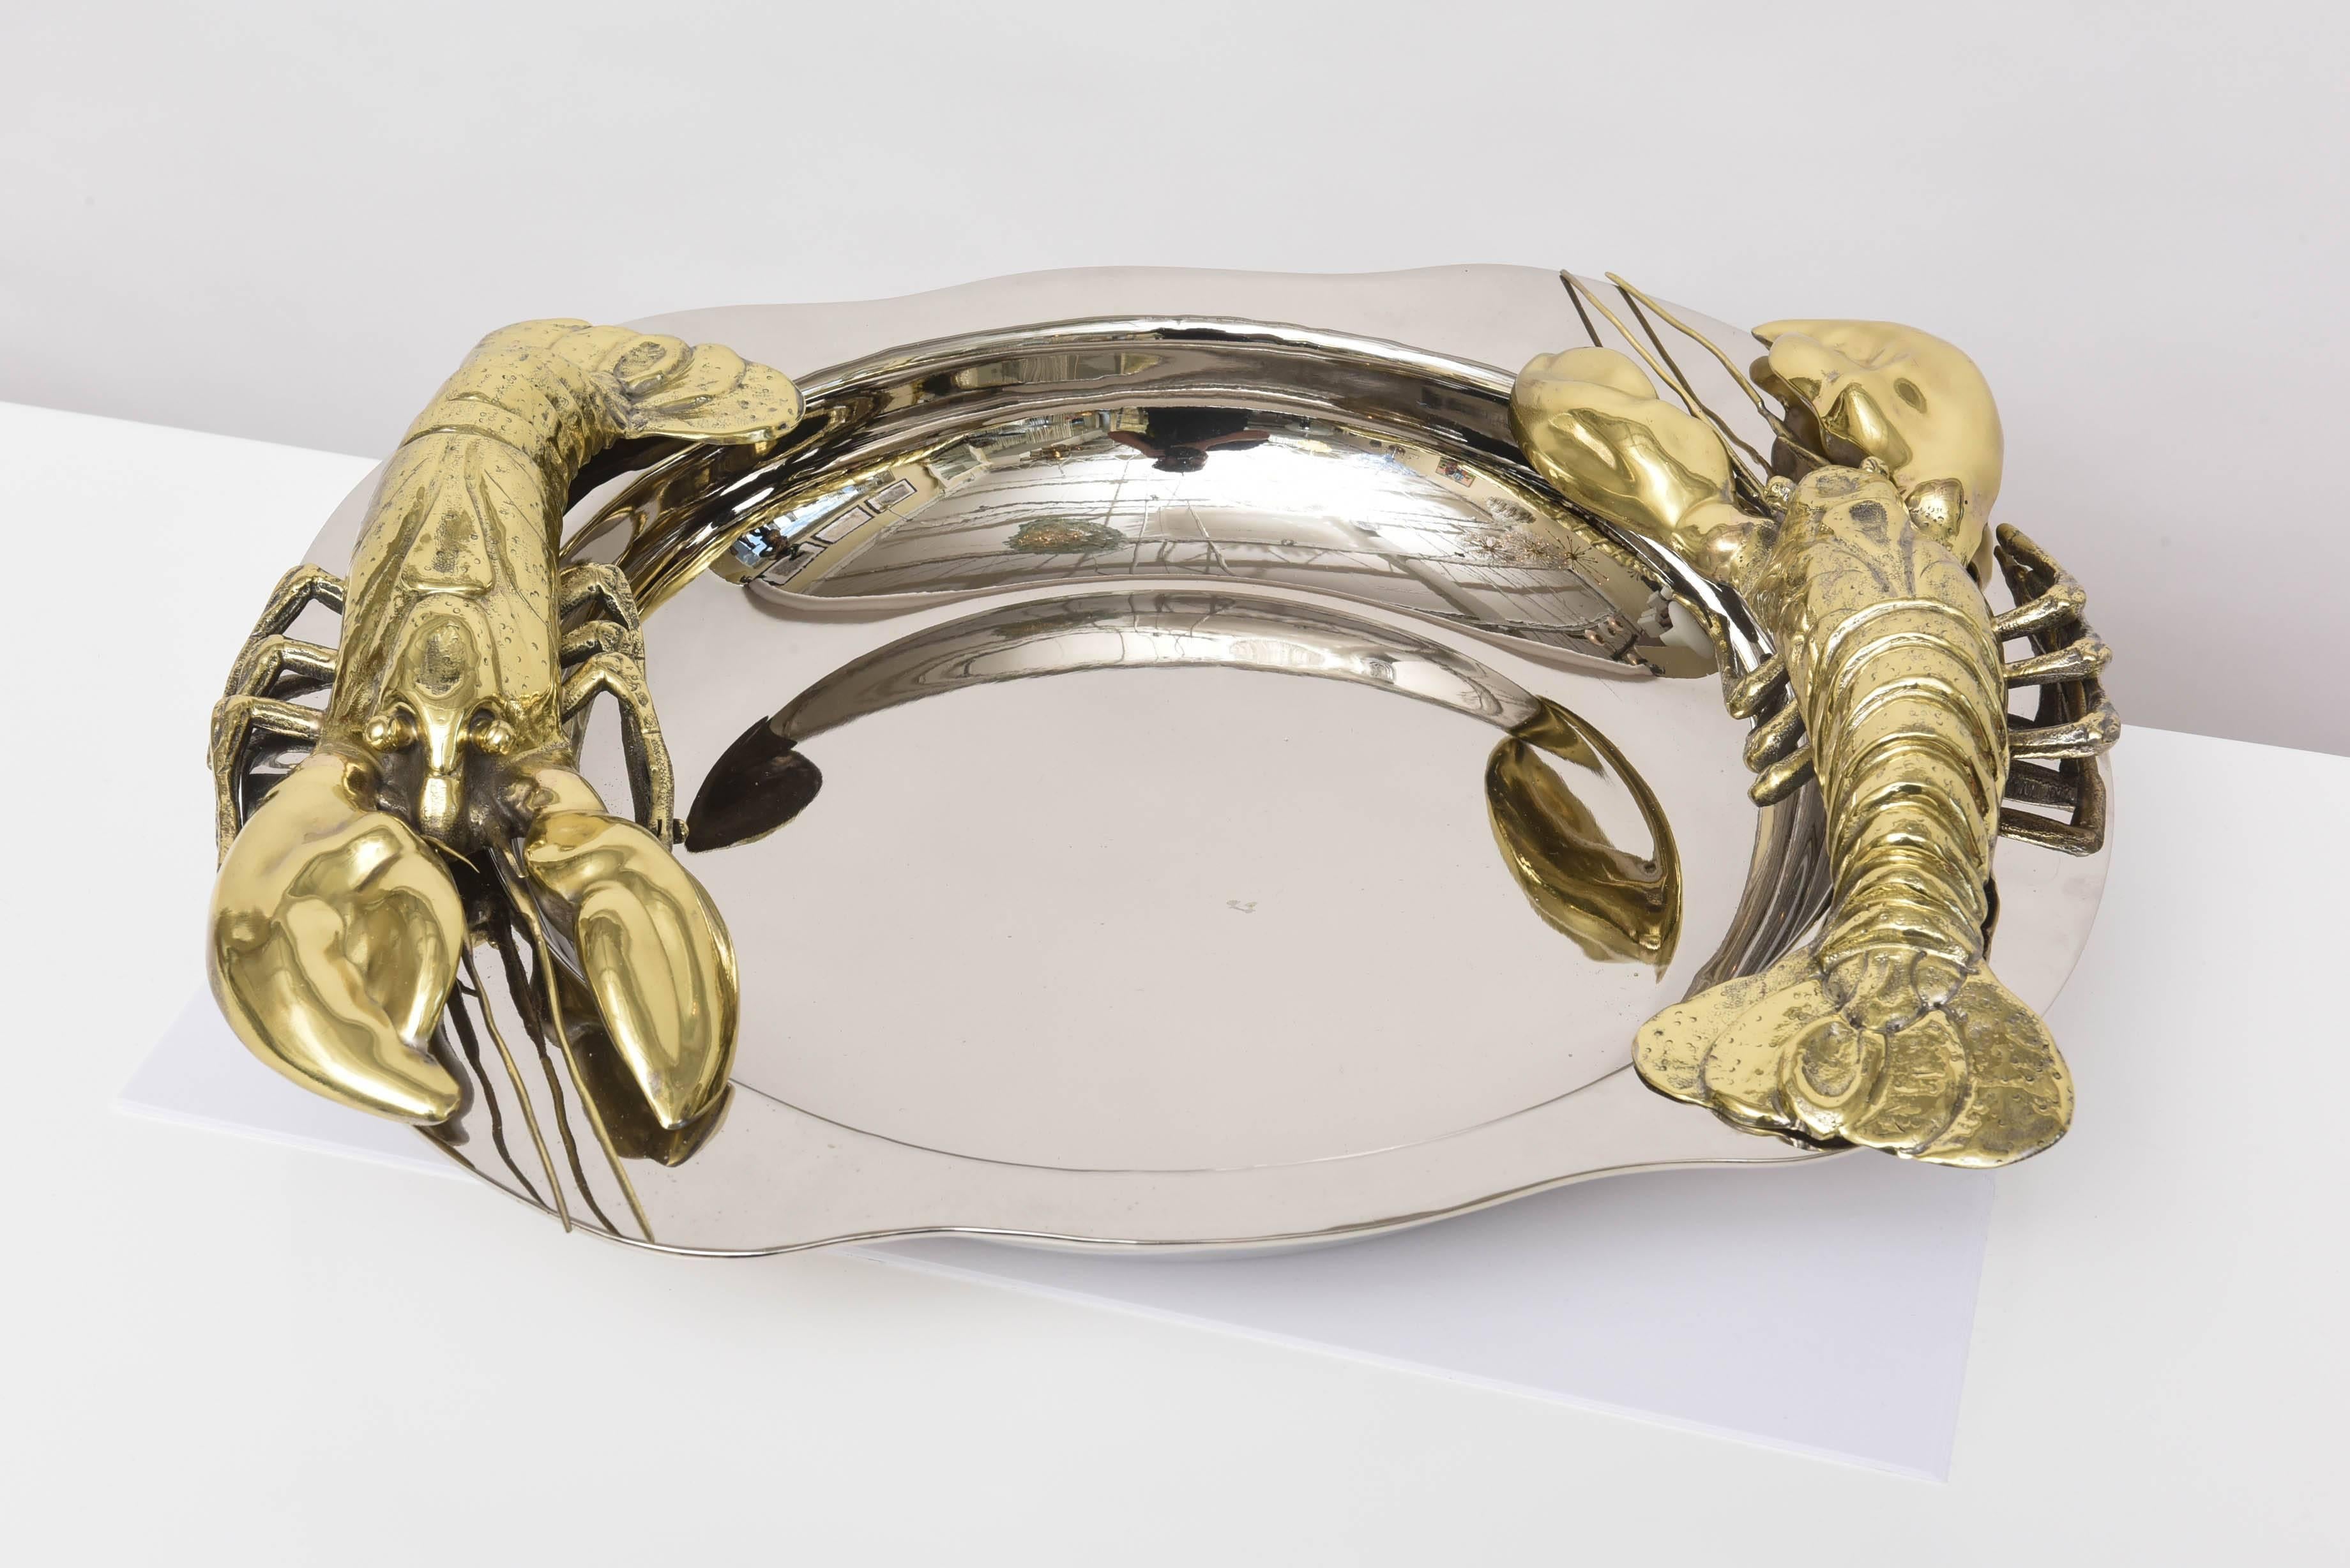 Lobster server created by Franco Lagini from Italy. Silver plated dish with two detailed lobsters in brass on the sides.